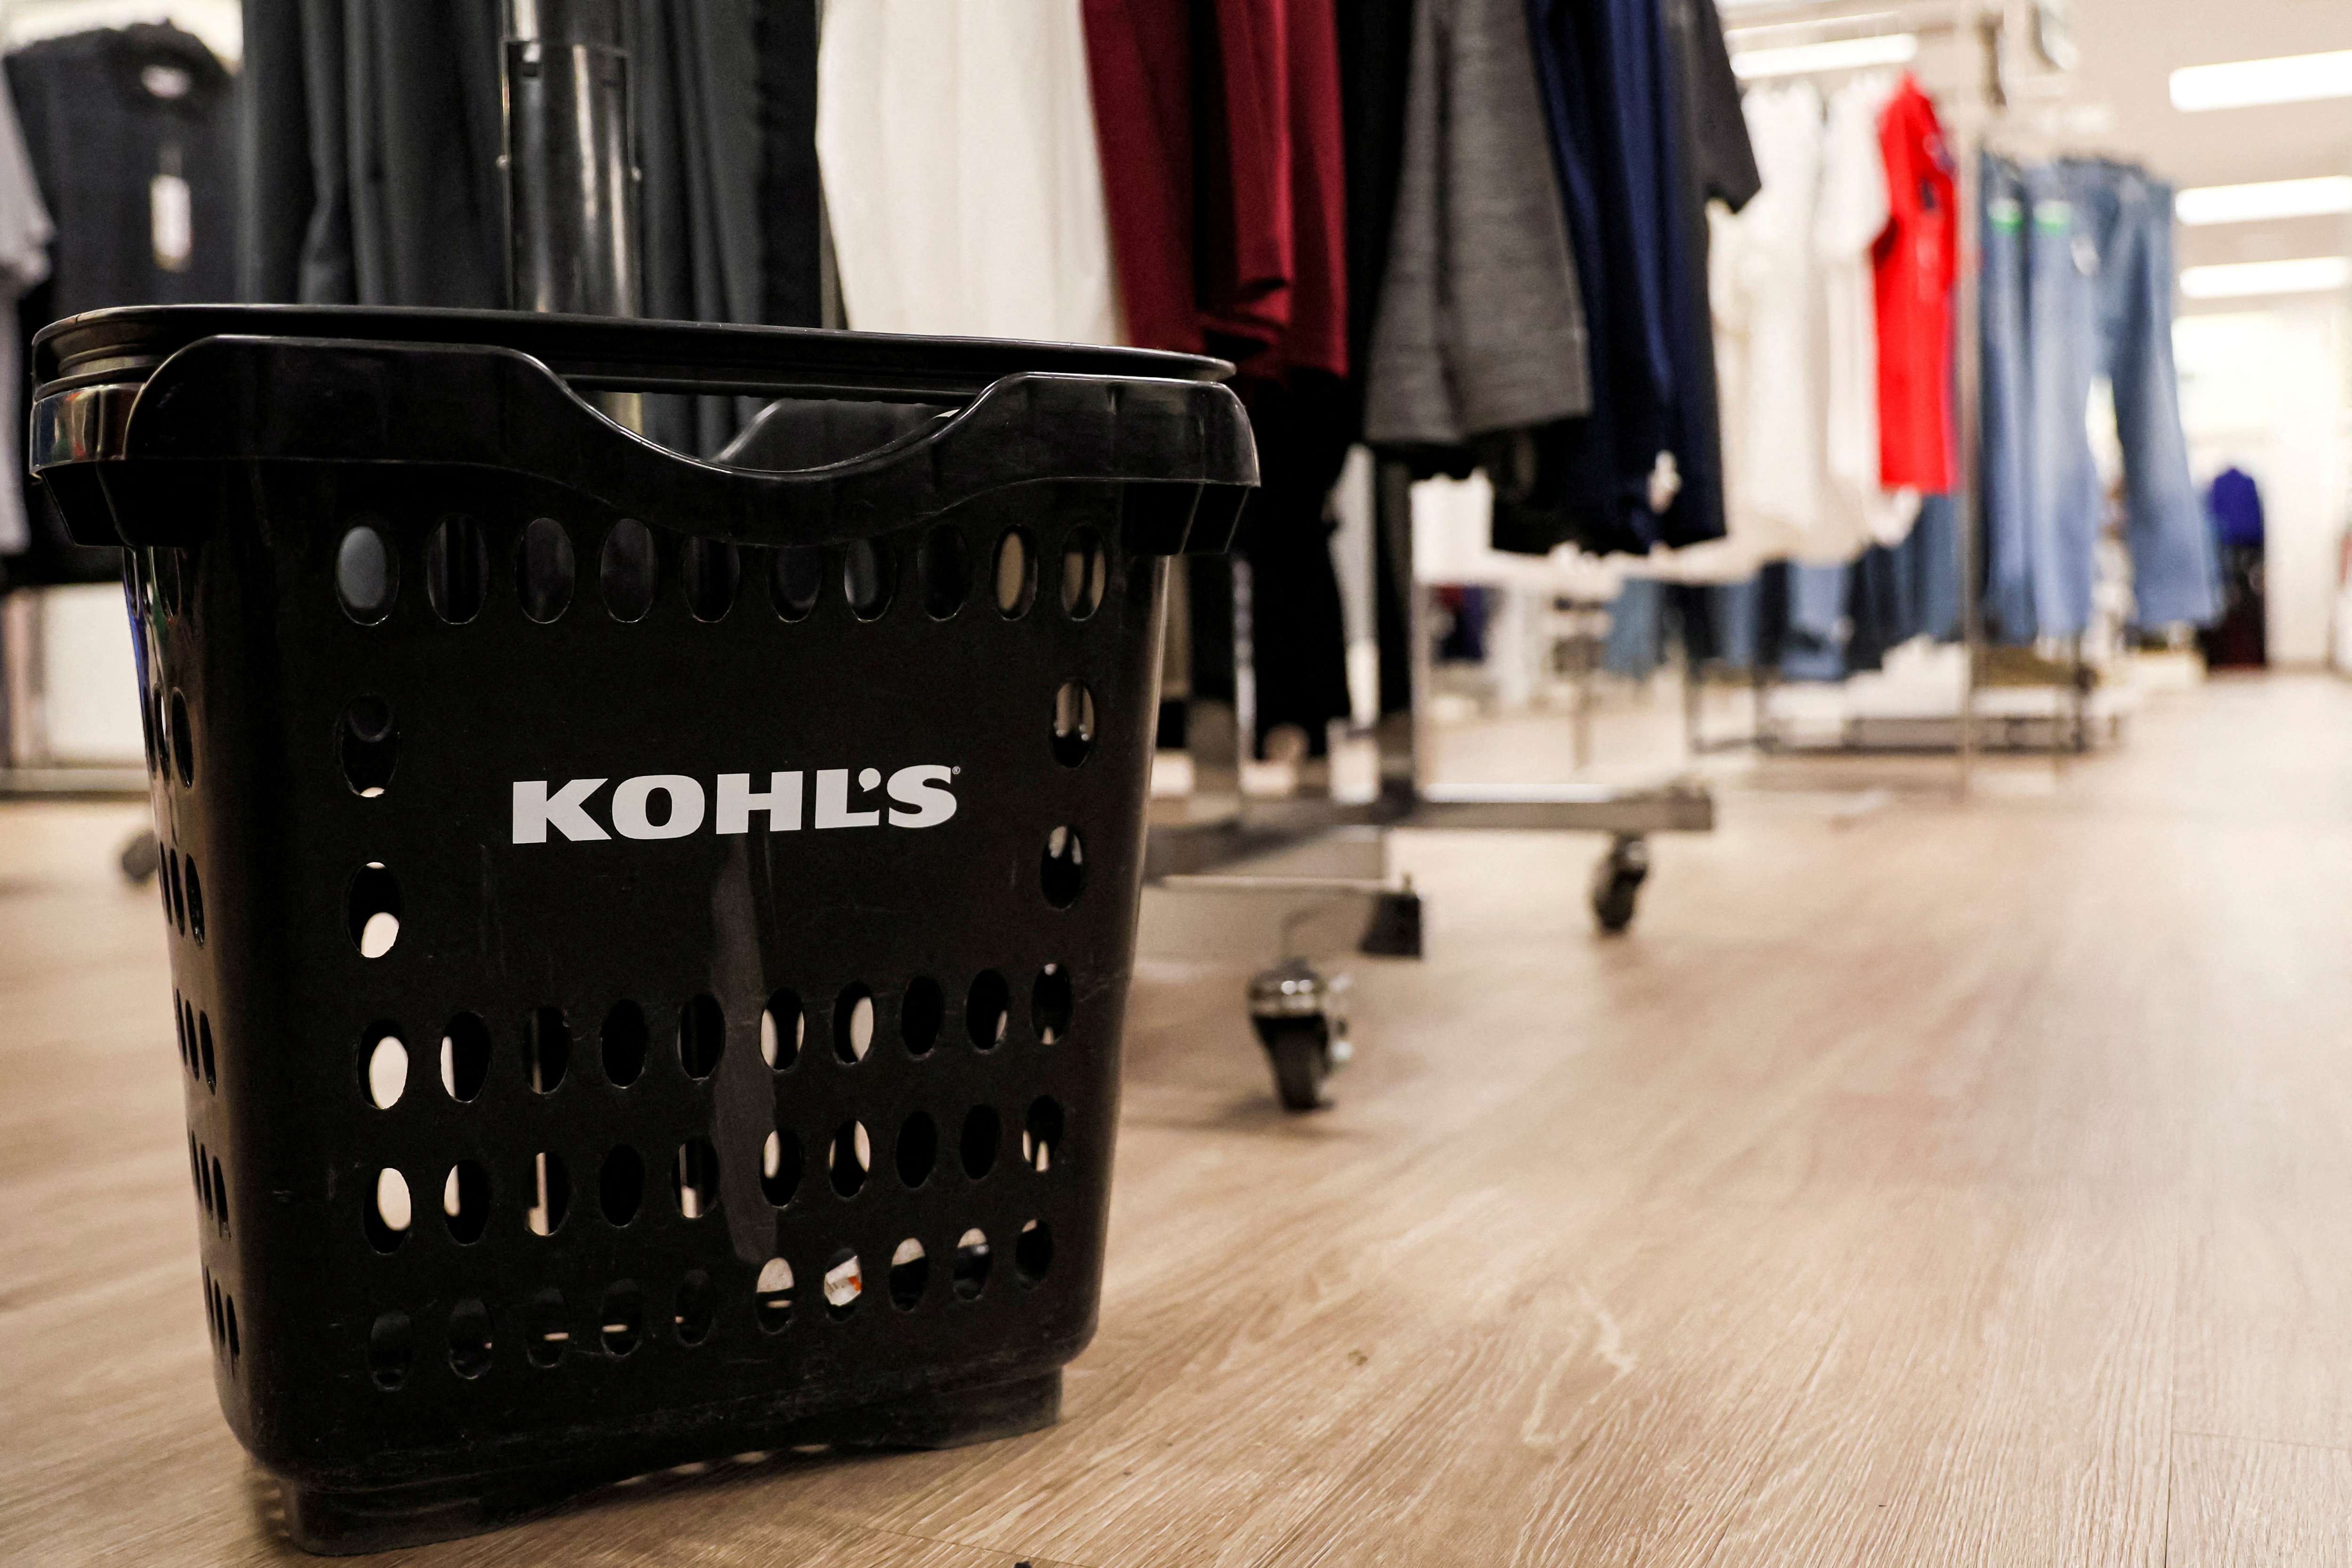 A Kohl’s department store in New York, U.S.